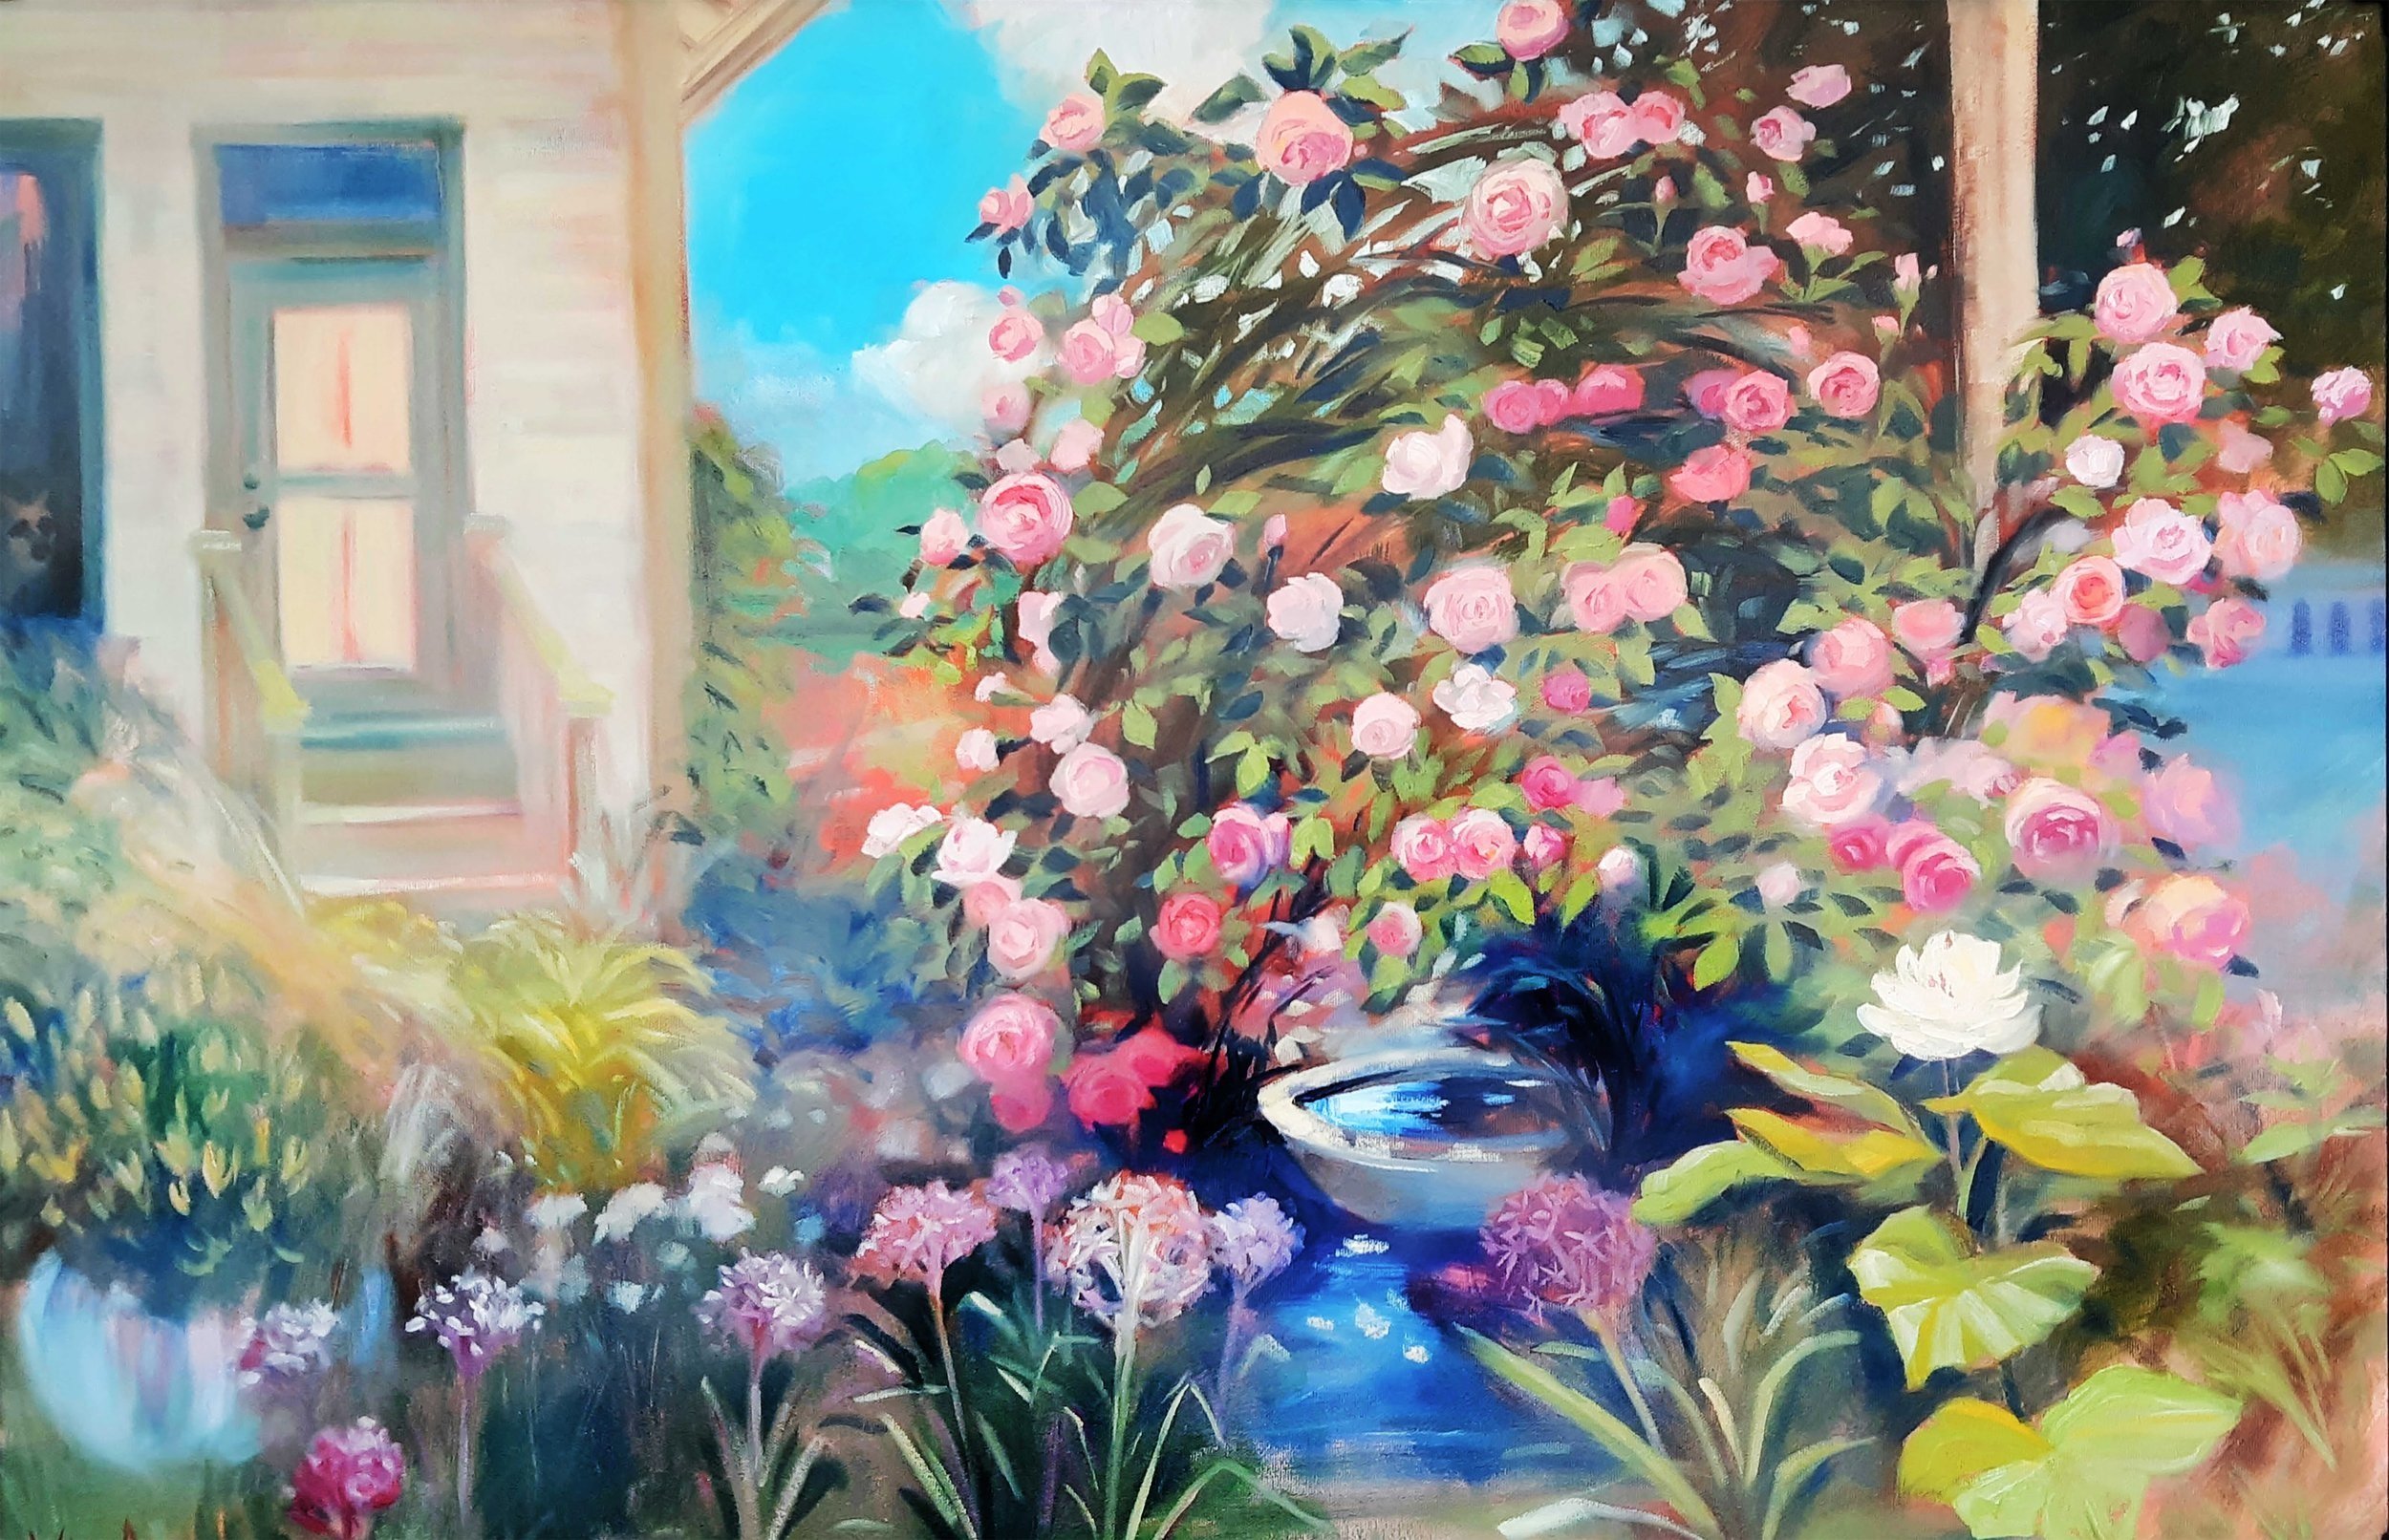 SOLD, Fountain of Roses Painting, Oil on Canvas, Copyright 2020 Hirschten